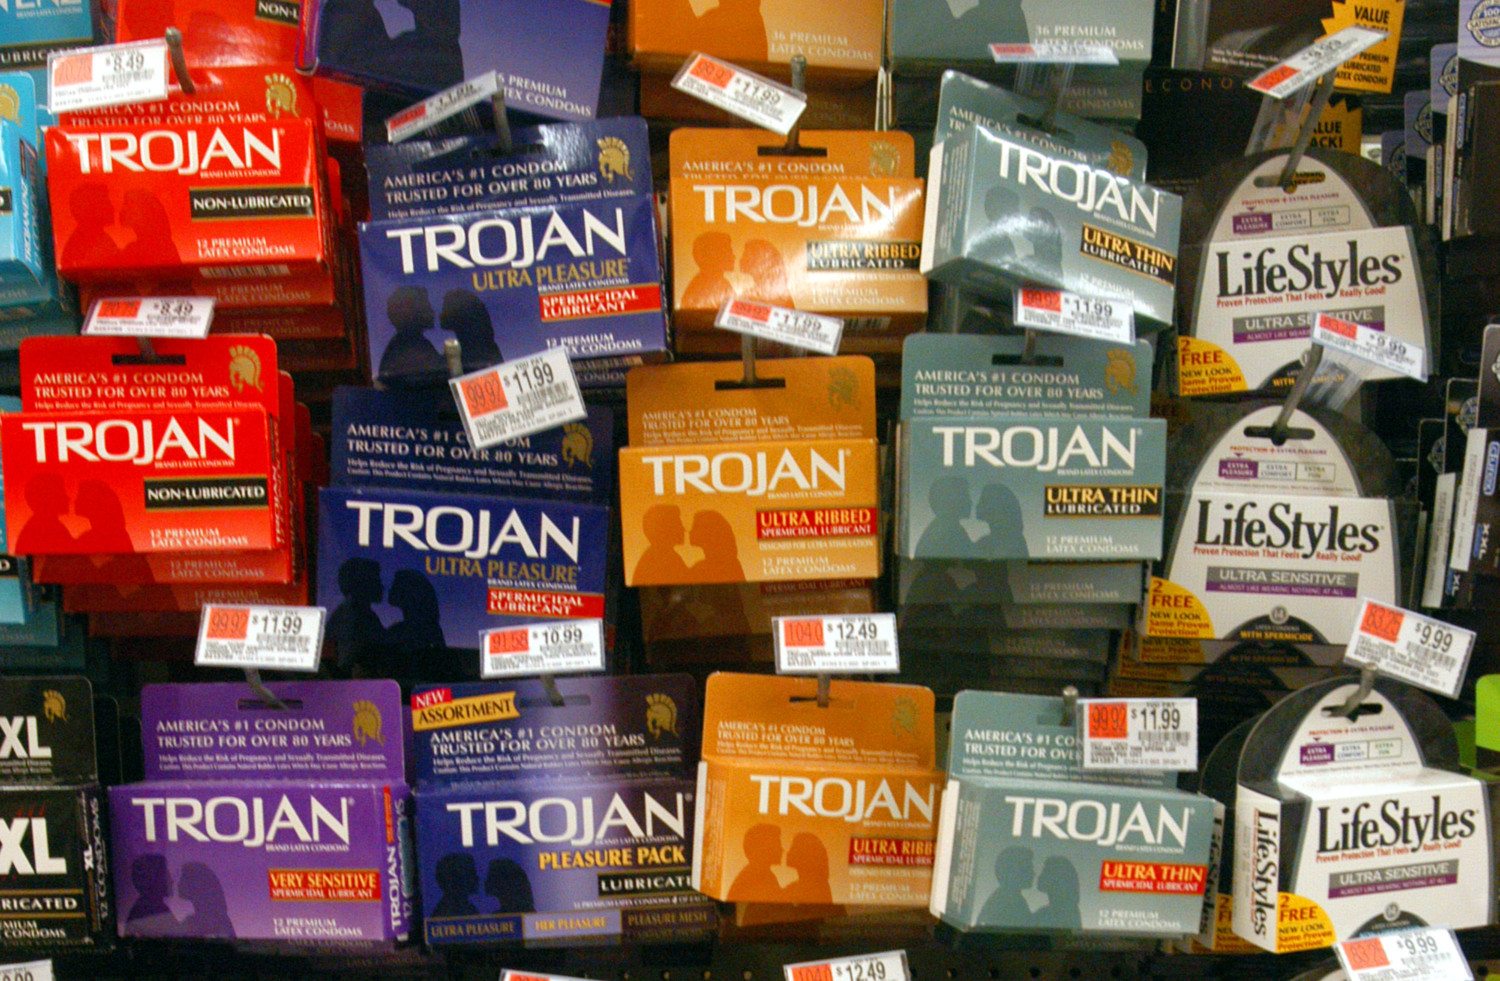 Bush Administration Considers Requiring Warning Labels For Condoms